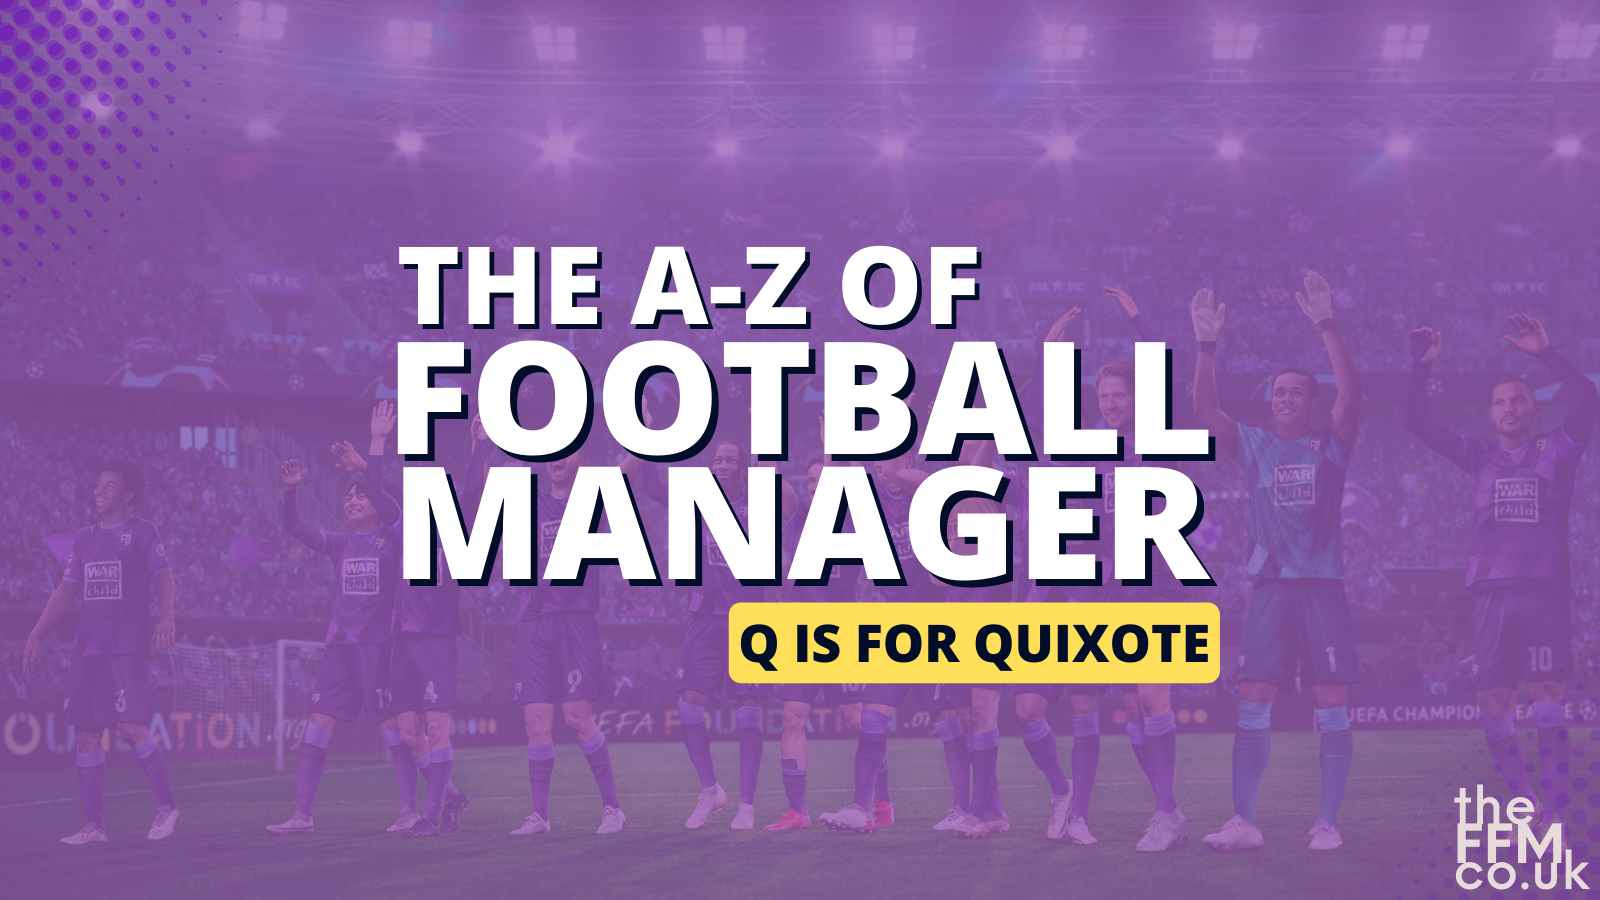 Football Manager A-Z: Q for Quixote